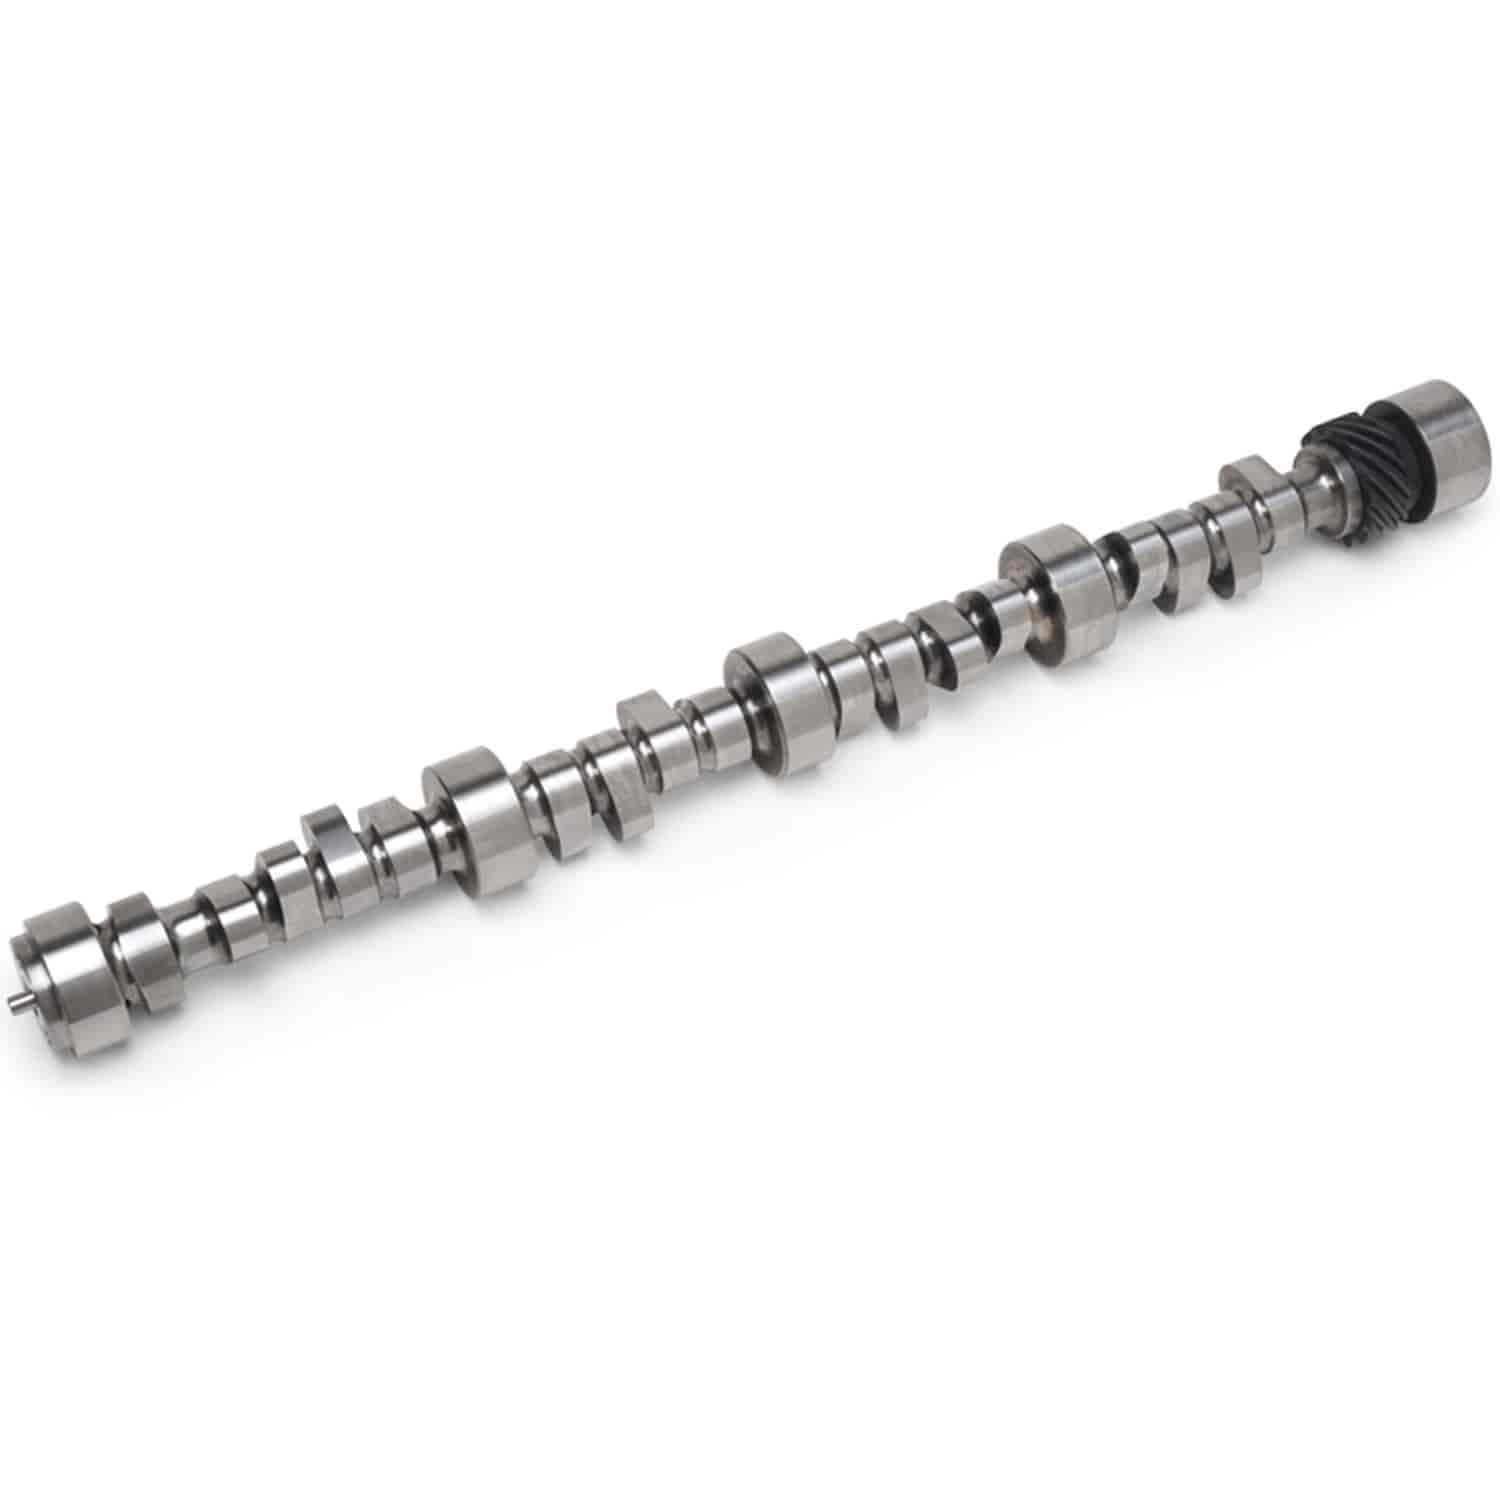 Rollin' Thunder Hydraulic Roller Camshaft for 1987-Later Small